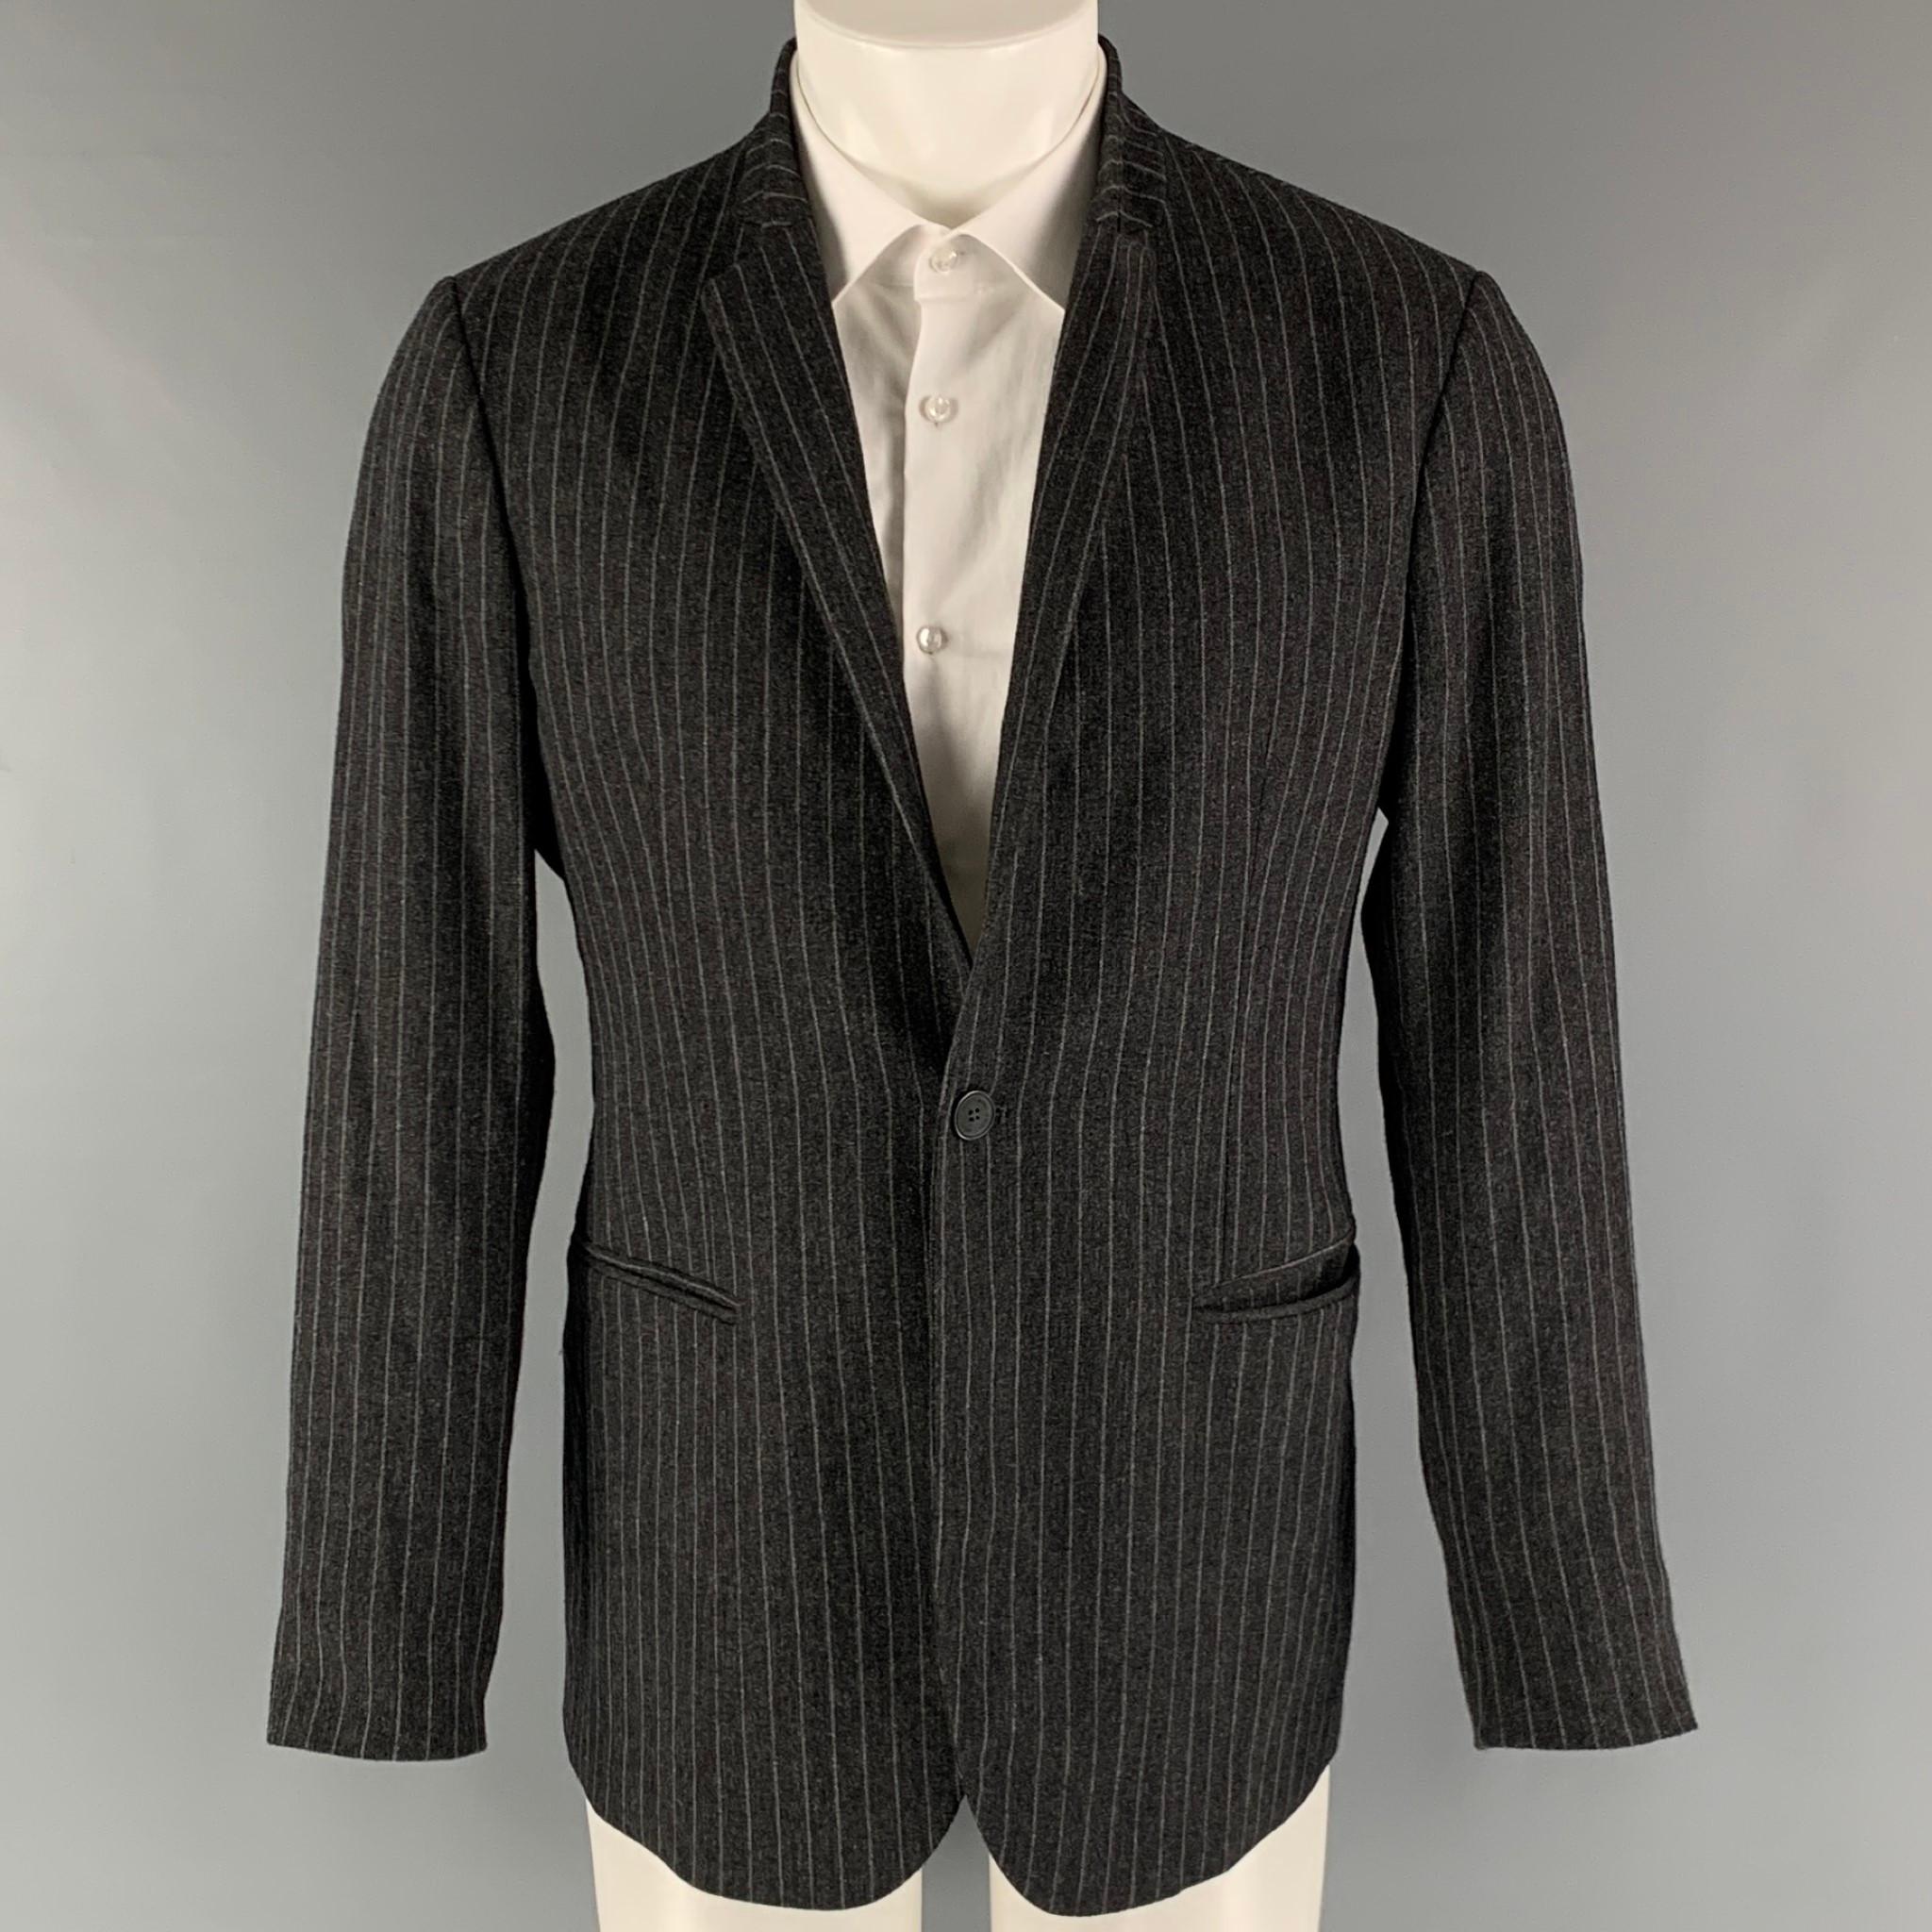 EMPORIO ARMANI 'Johnny Line' sport coat comes in a grey and charcoal wool chalk striped woven material full liner featuring a high collar, welt pockets, single back vent, and a single button closure. Made in Italy.

Excellent Pre-Owned